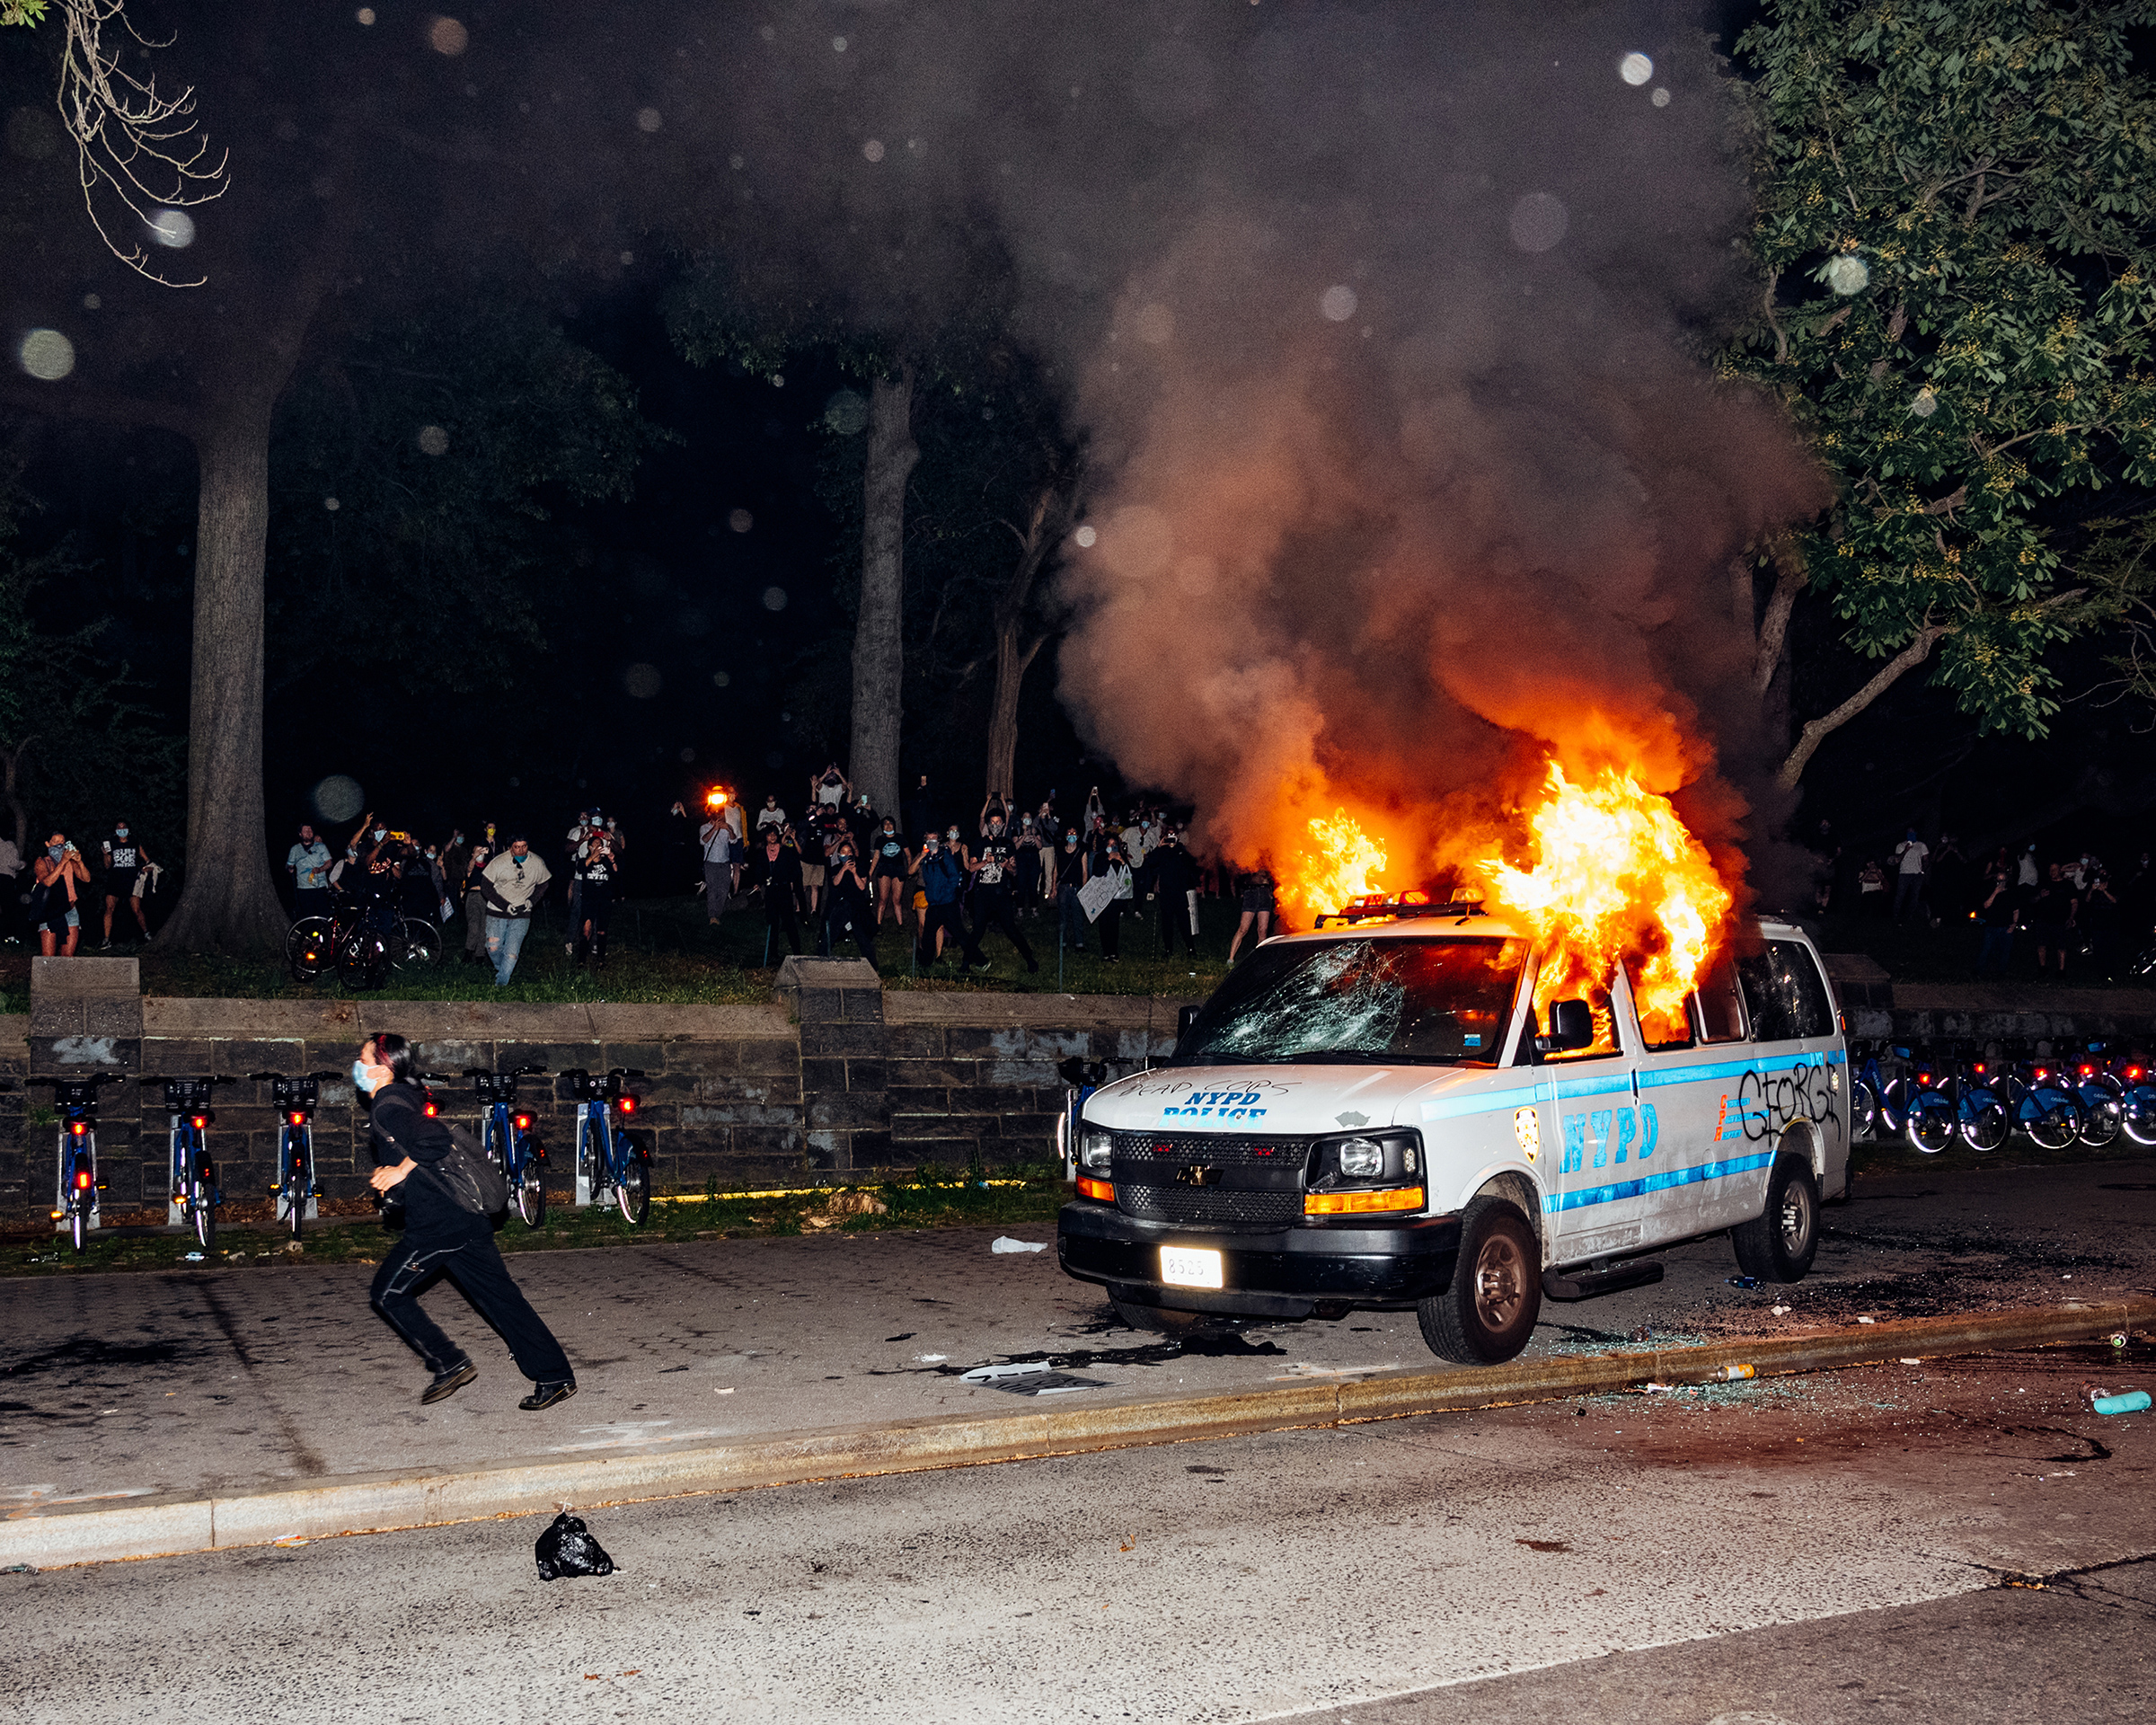 An NYPD van burns next to Fort Greene Park.